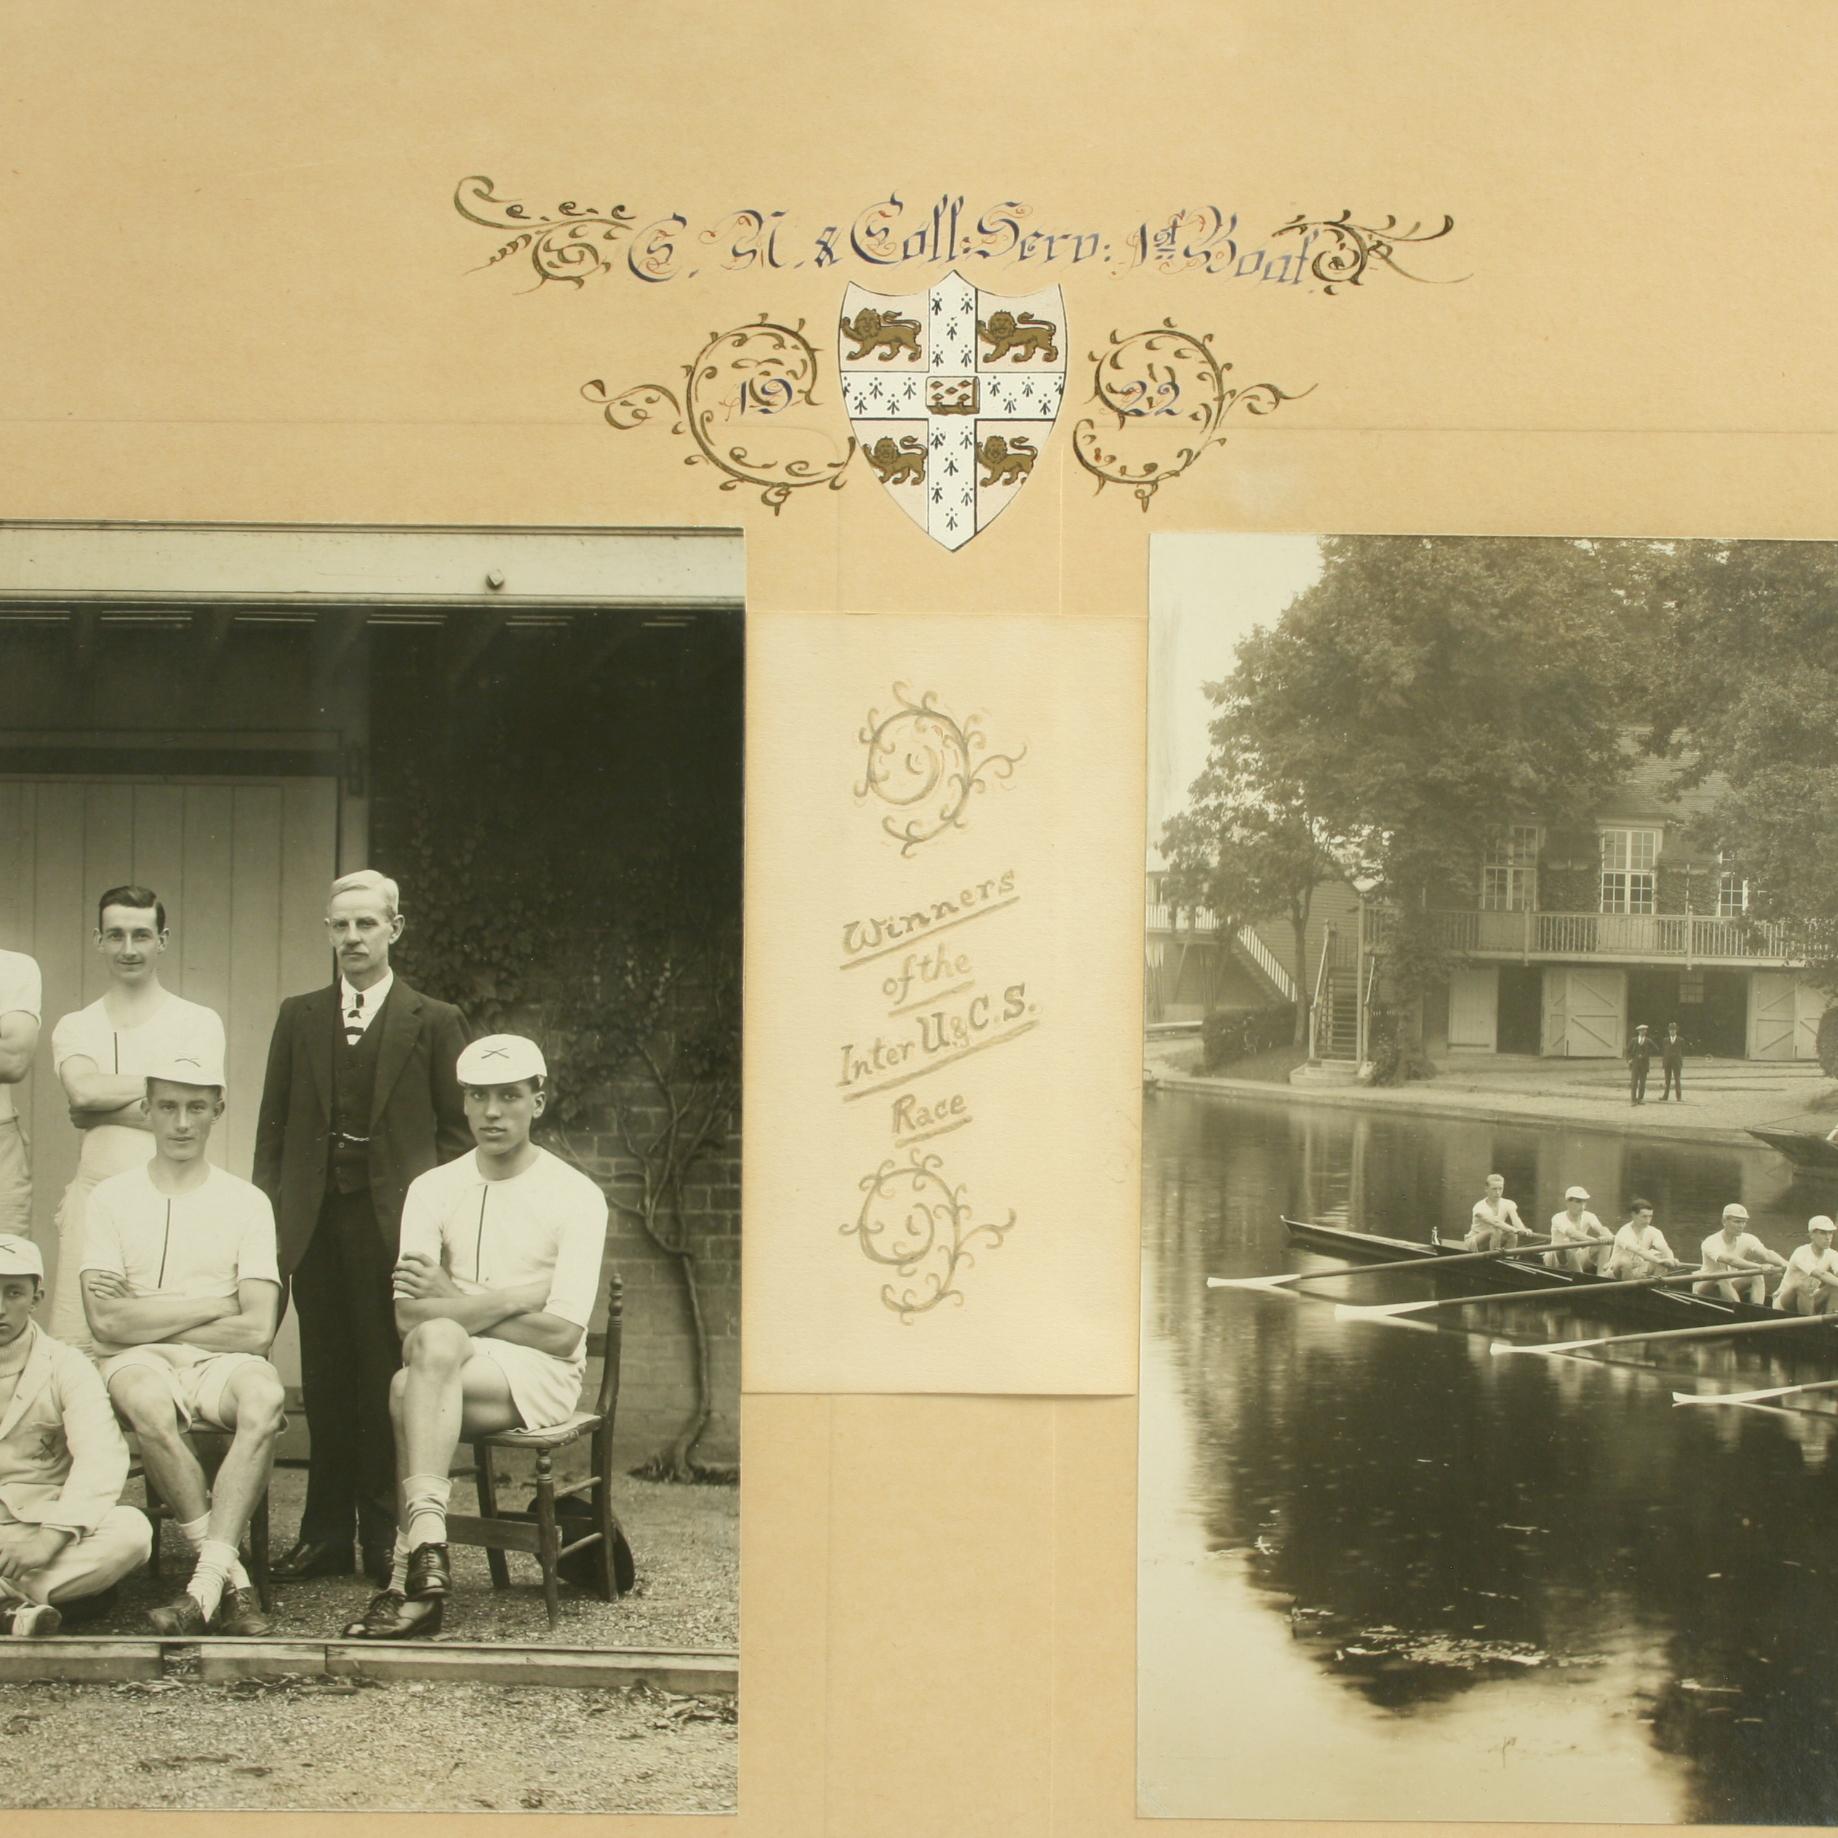 Cambridge University Association College Servants Double Rowing photograph.
A good framed Cambridge Association College Servants rowing team photo of the 1922 1st boat crew, winners of the Inter U. & C.S. race. The photos are framed in a